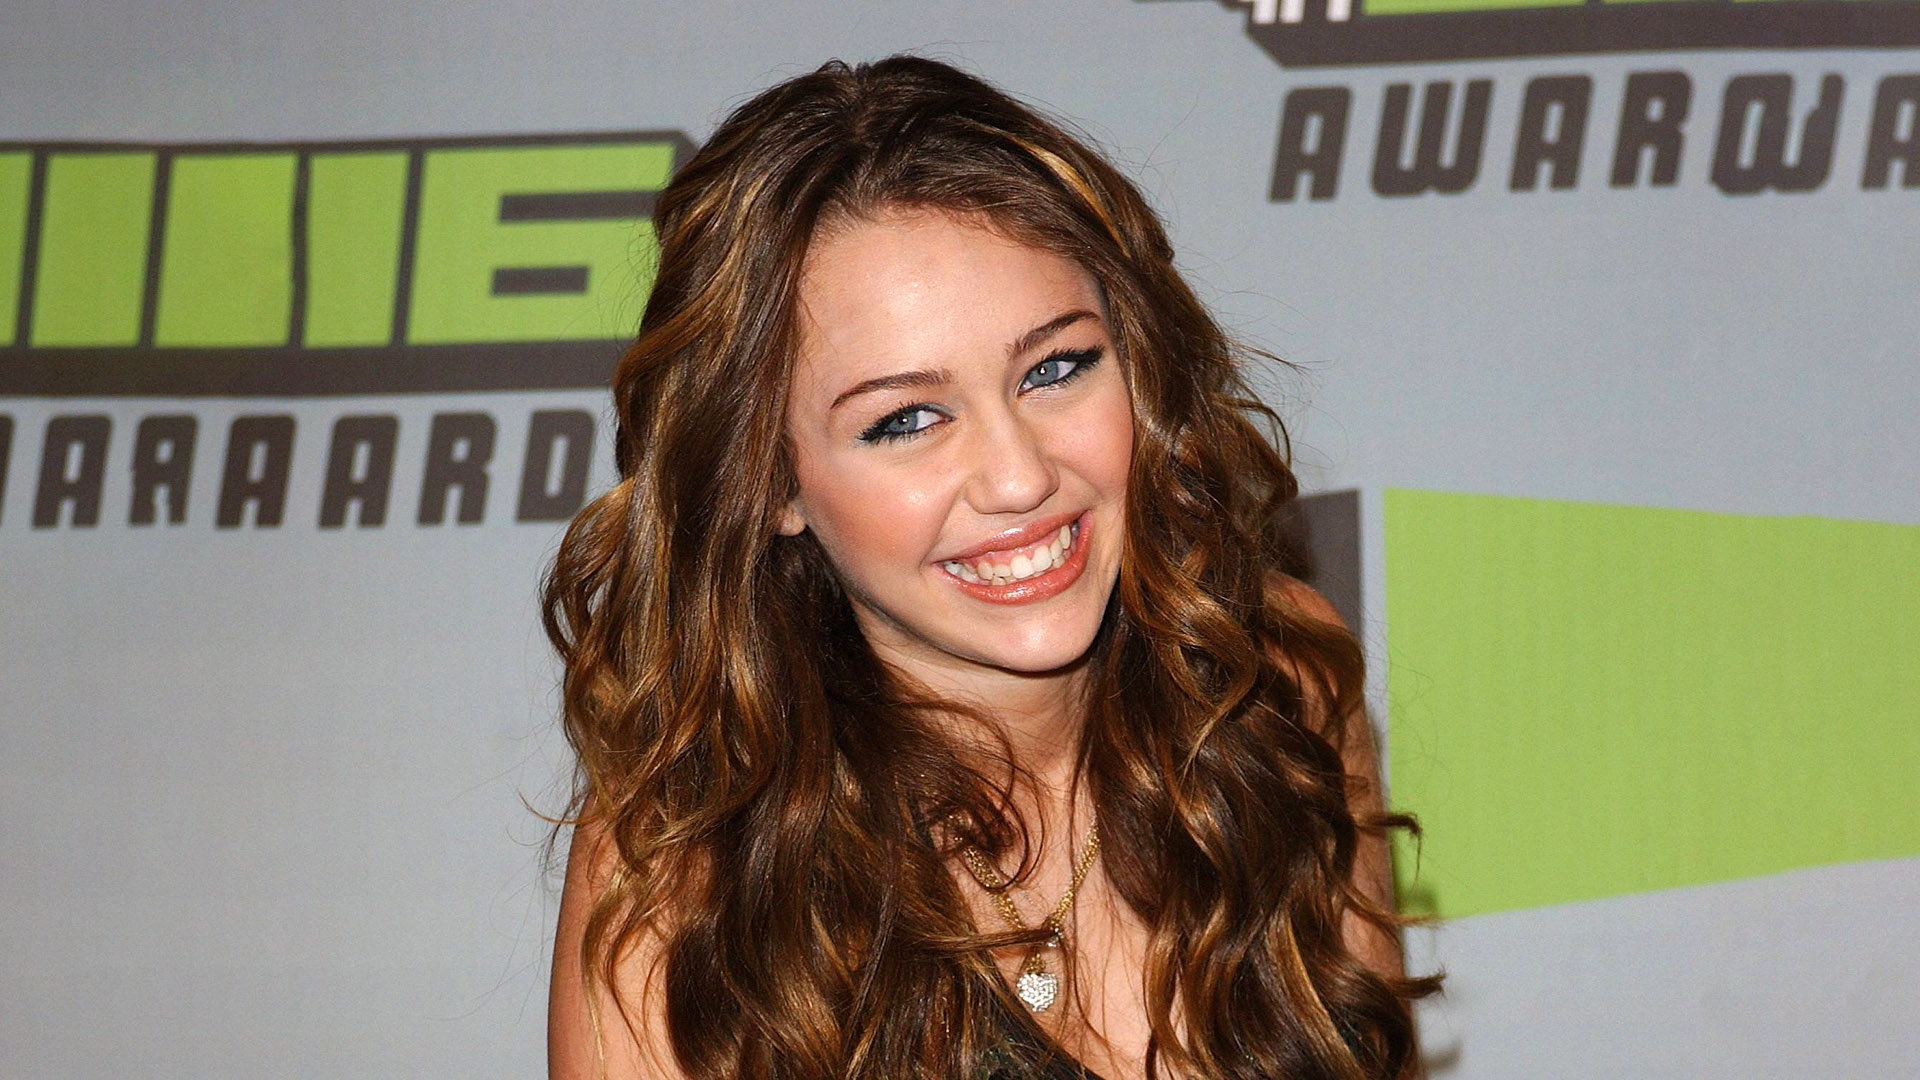 Miley Cyrus Gets Painfully Candid About Her Insane Schedule As a Child Star